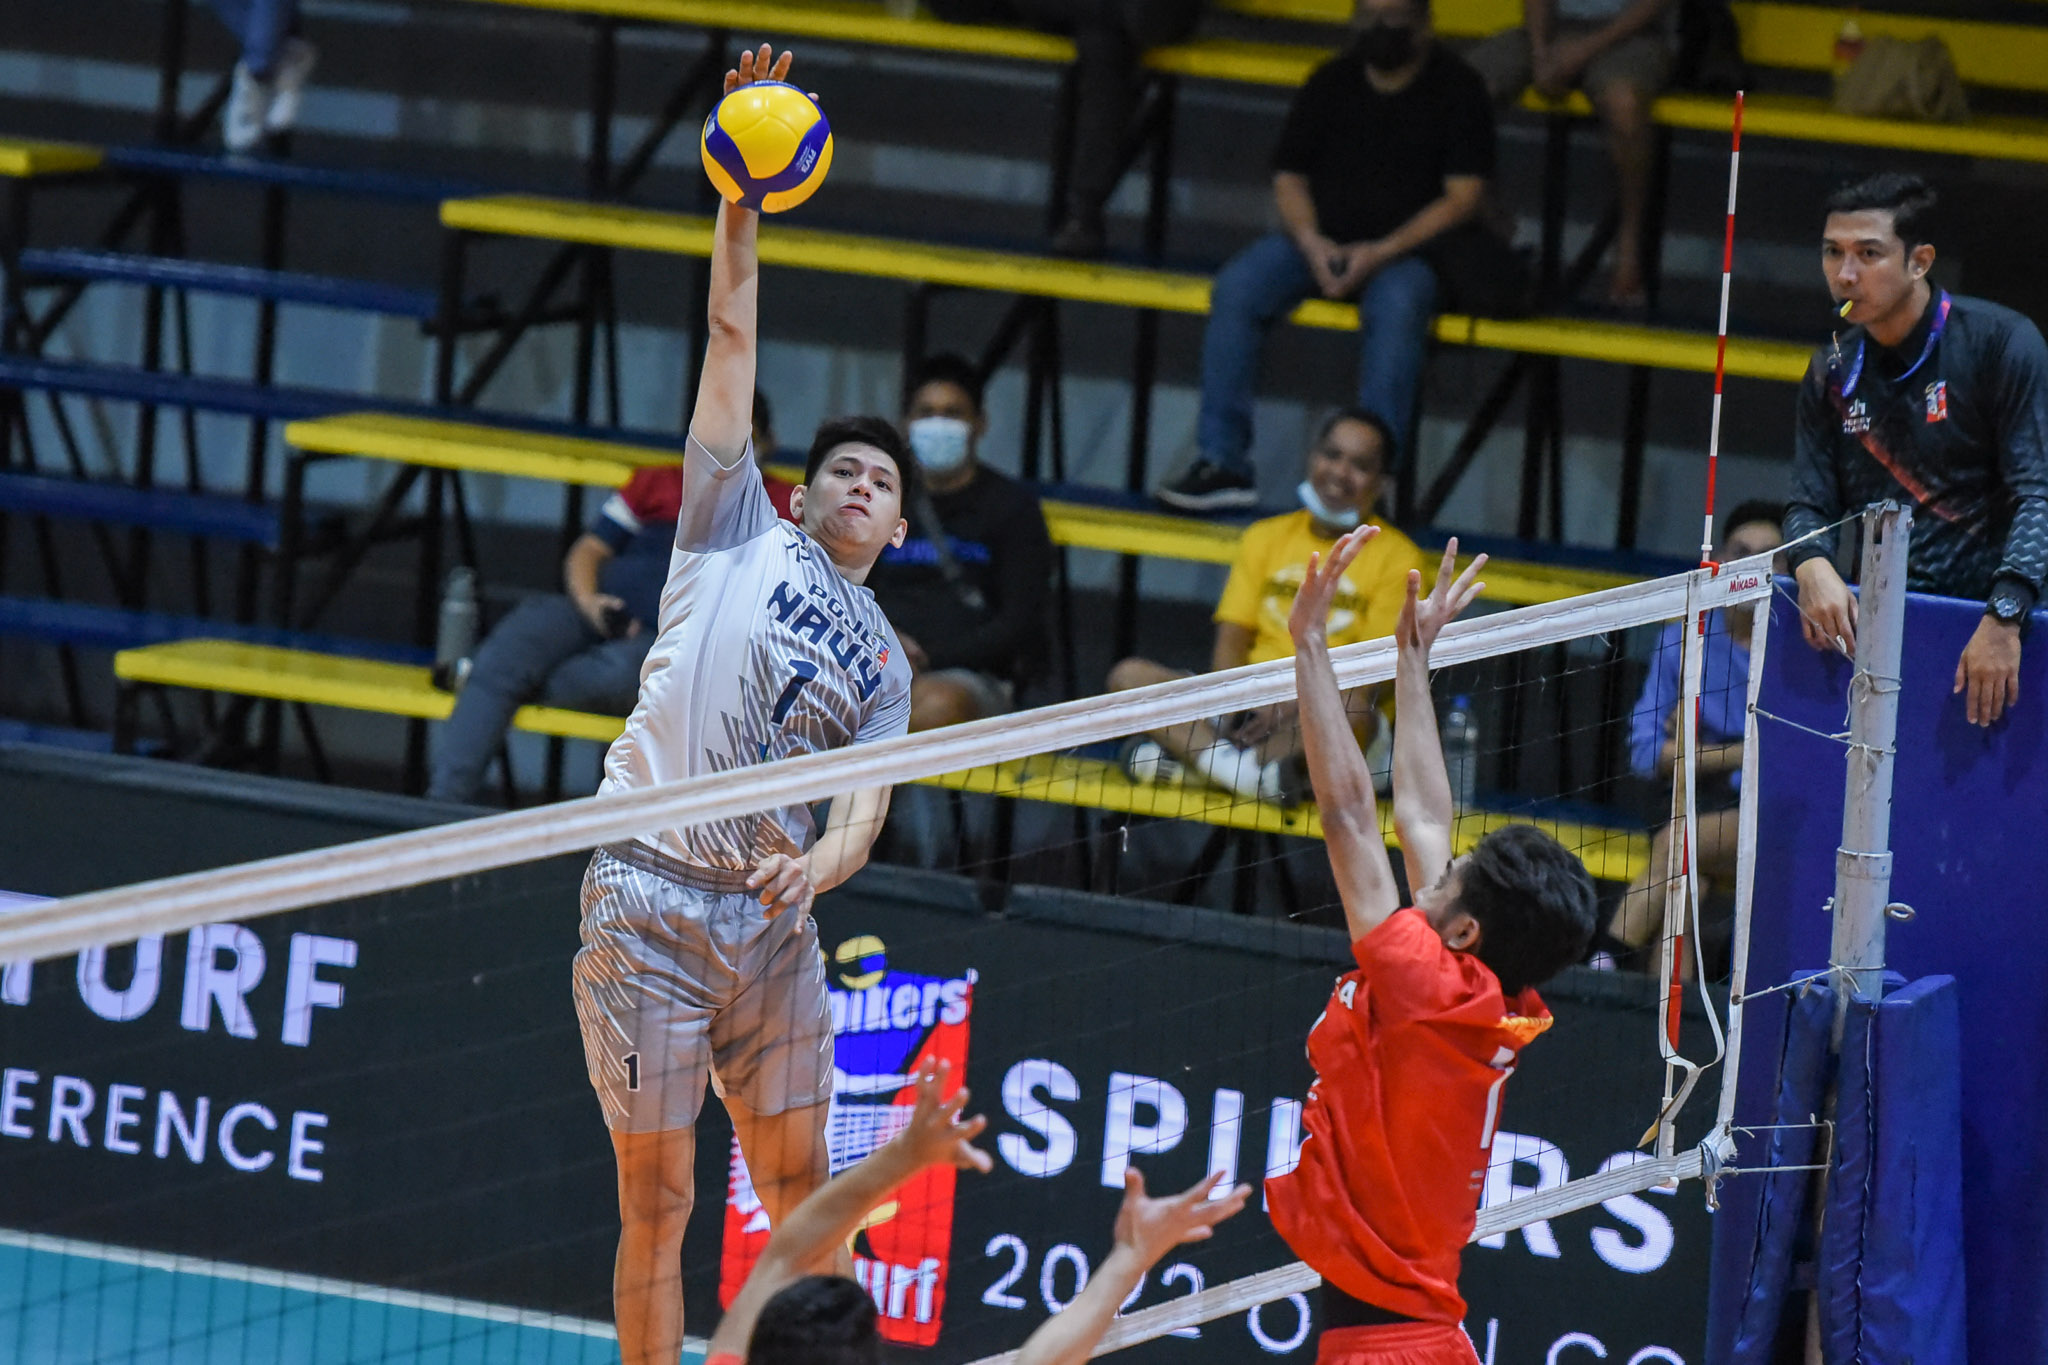 PGJC-Navy's Jao Umandal rises for a hit